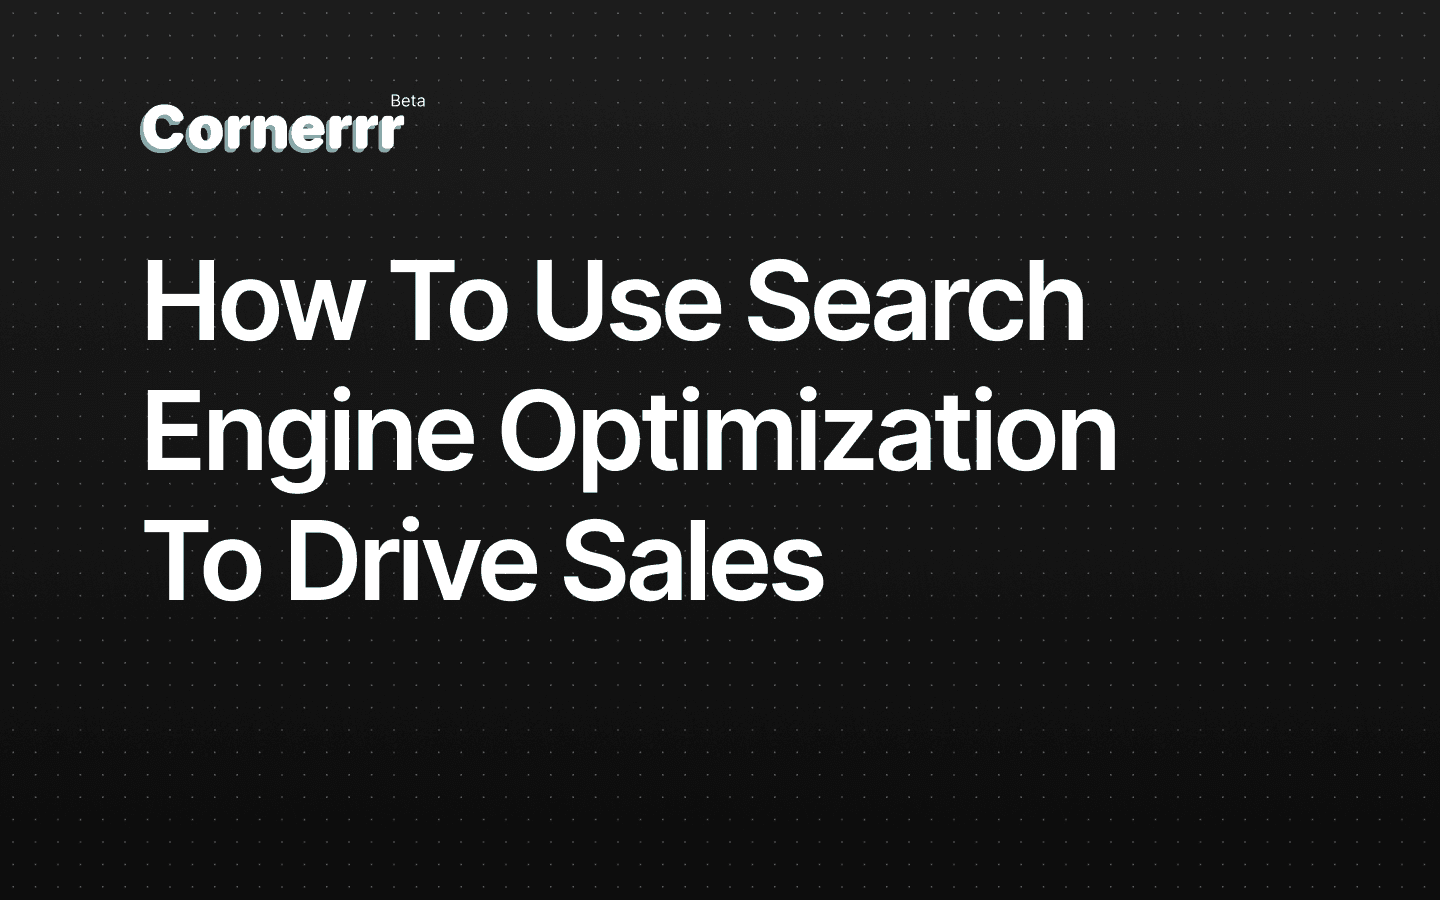 How to use search engine optimization to drive sales